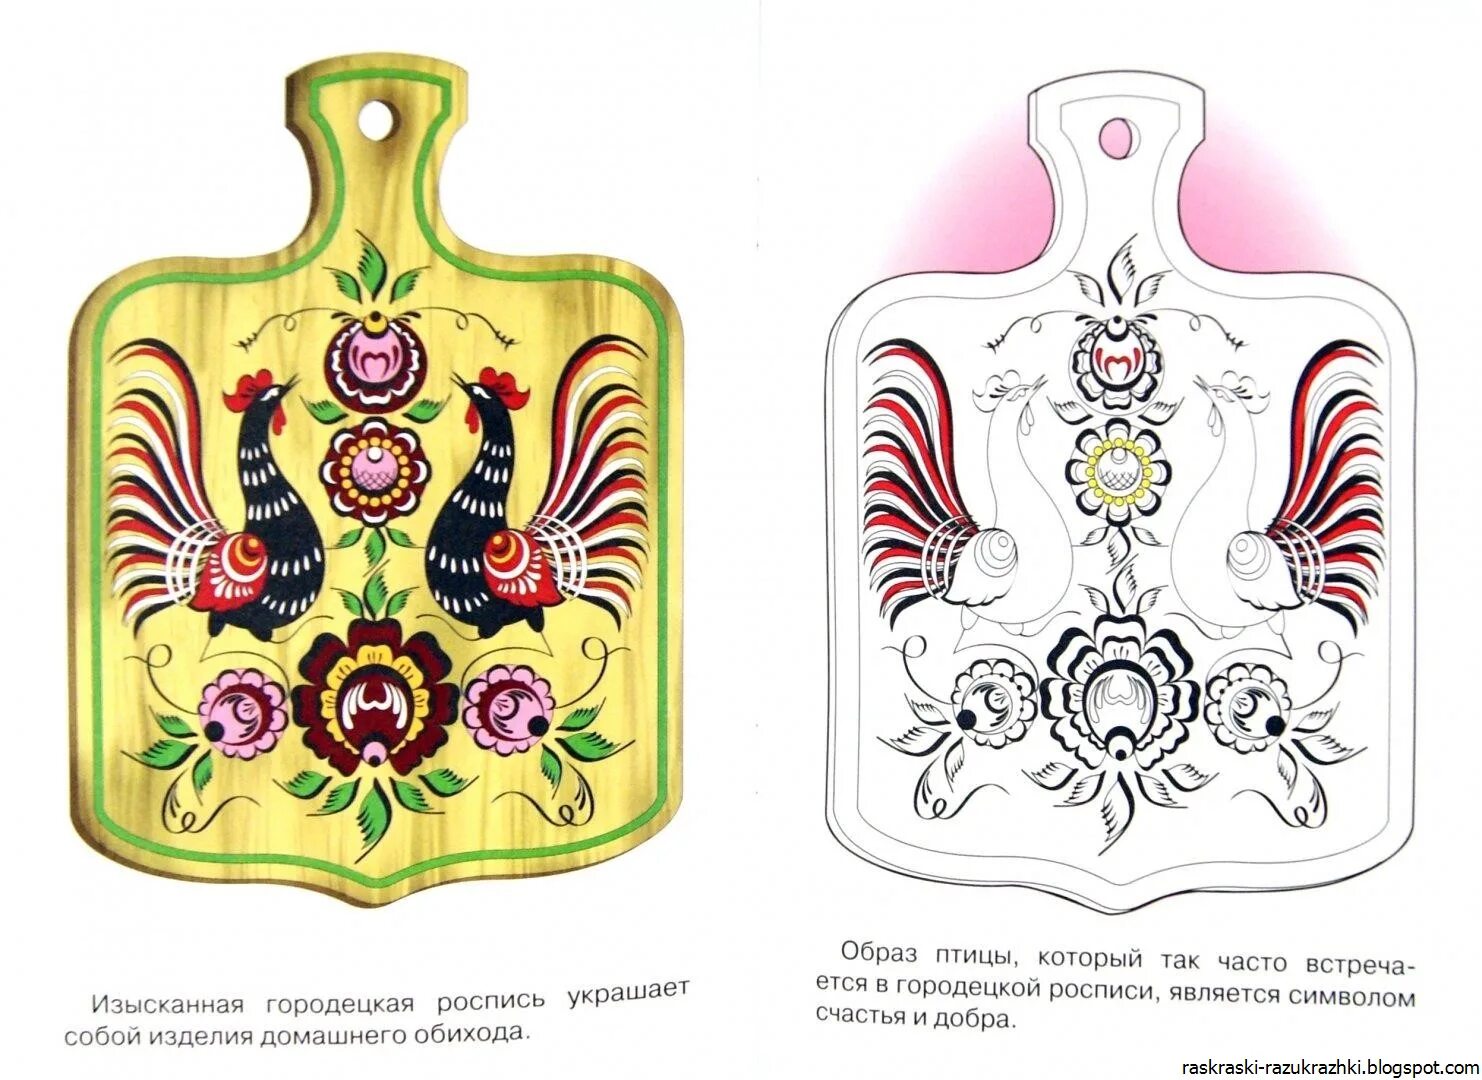 Stencil of luxurious Gorodets painting